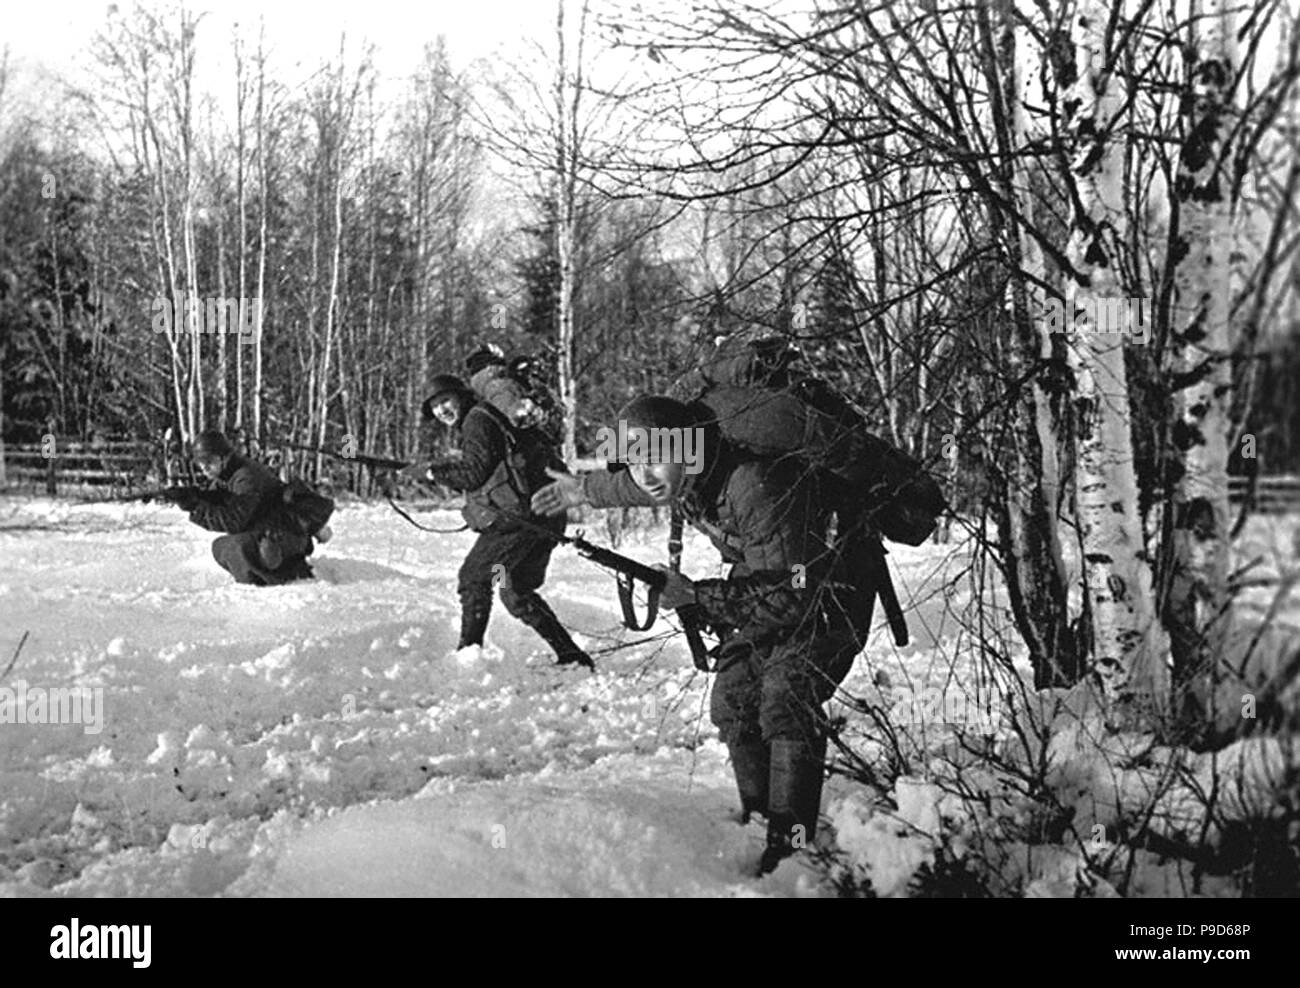 Red Army soldiers in a forest. The Winter War. 1939. Museum: Russian State Film and Photo Archive, Krasnogorsk. Stock Photo